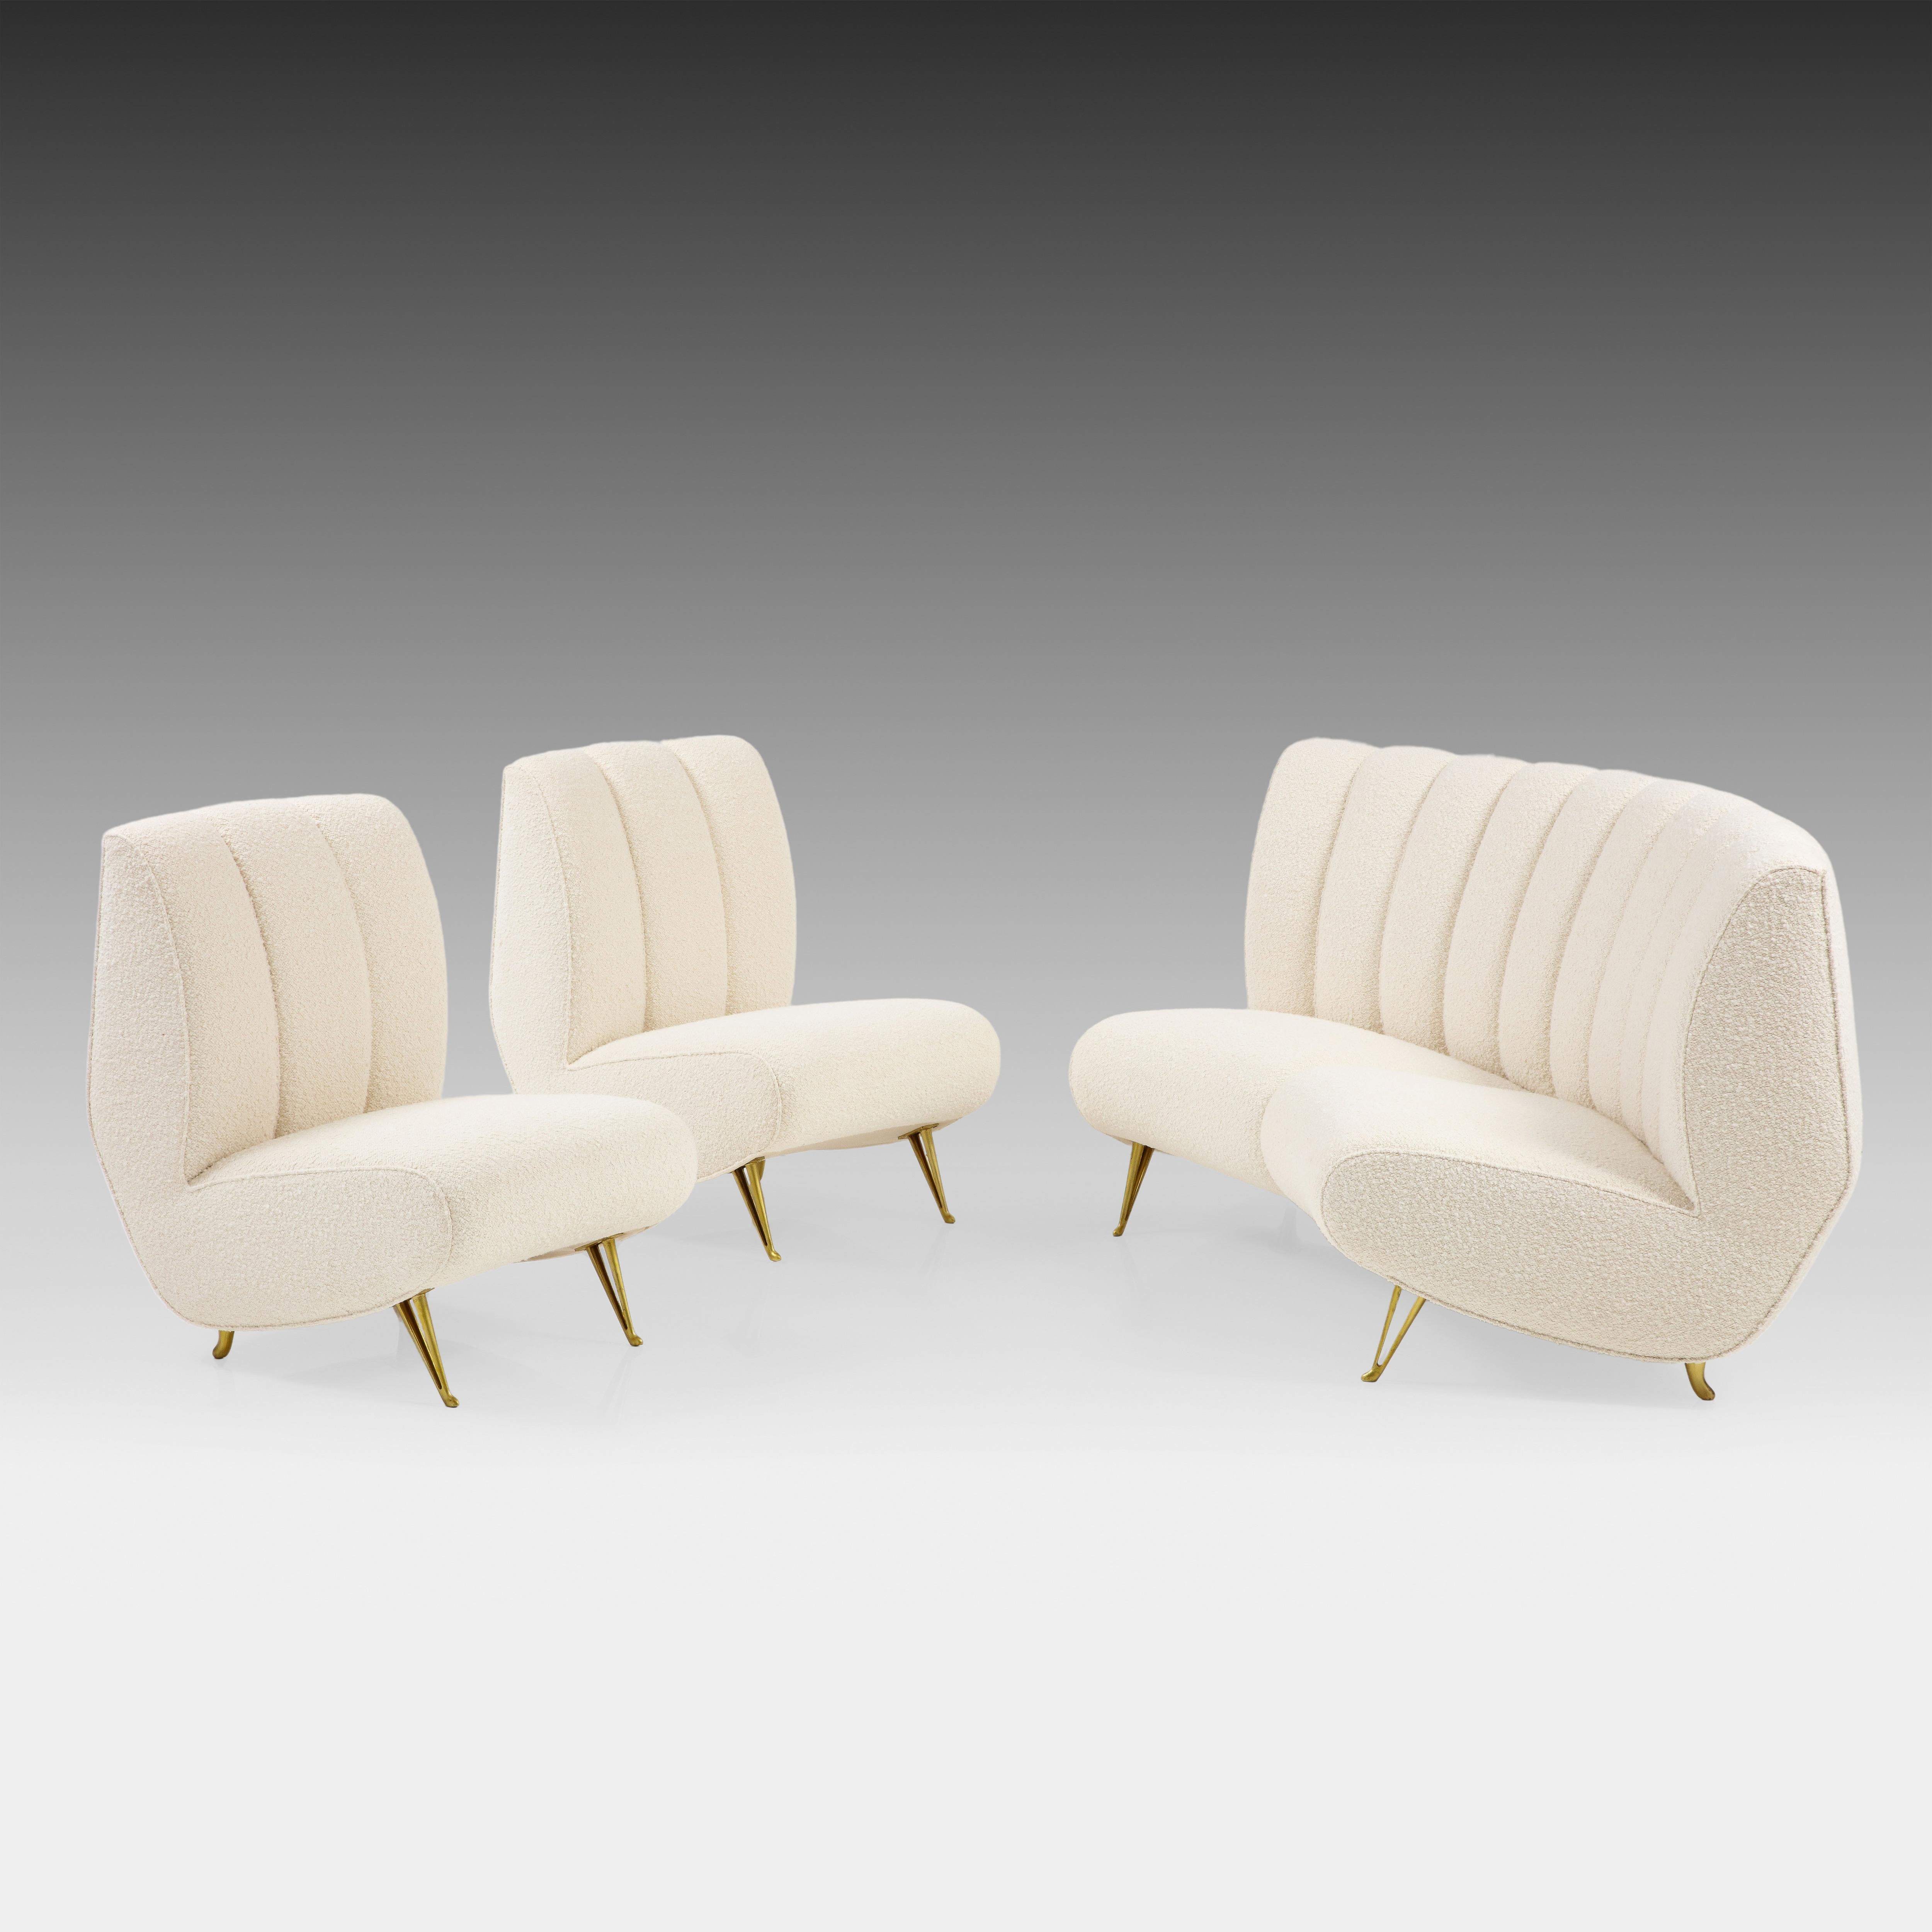 ISA Bergamo Rare Curved Settee in Ivory Bouclé, Italy, 1950s For Sale 6